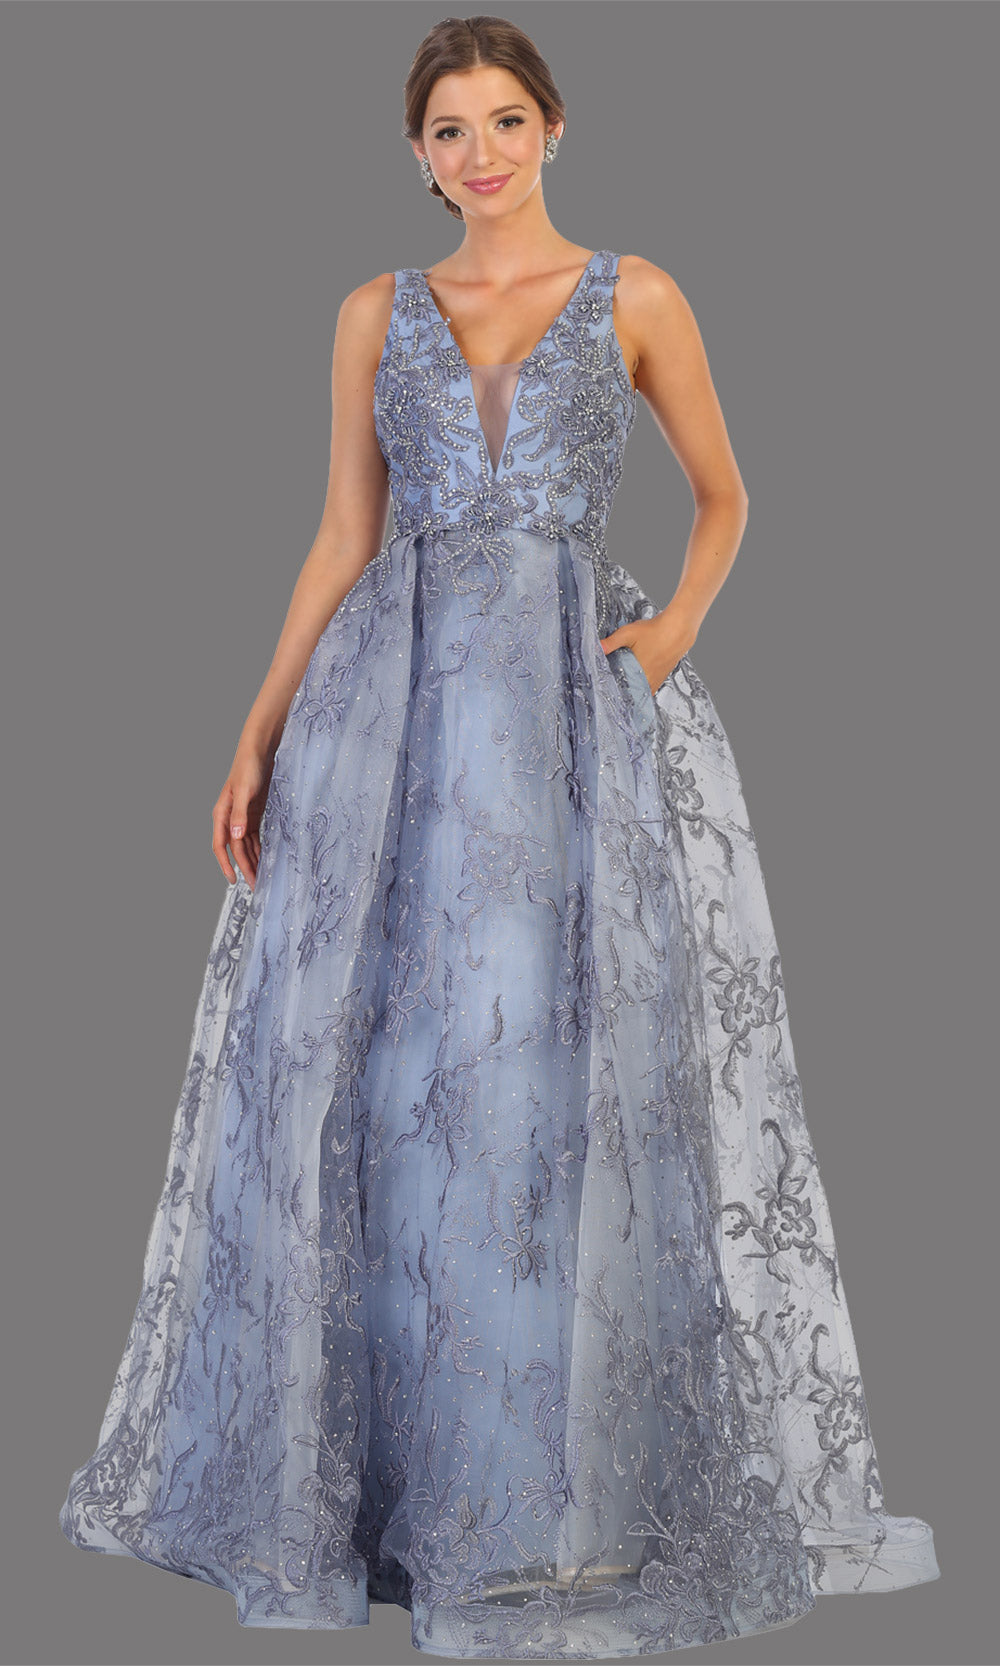 Mayqueen RQ7801 long dusty blue v neck flowy floral lace taffeta dress. Perfect blue dress for prom, engagement dress, e-shoot dress, formal wedding guest dress, debut, quinceanera, sweet 16, gala. Plus sizes avail in this light blue semi ballgown-1.jpg